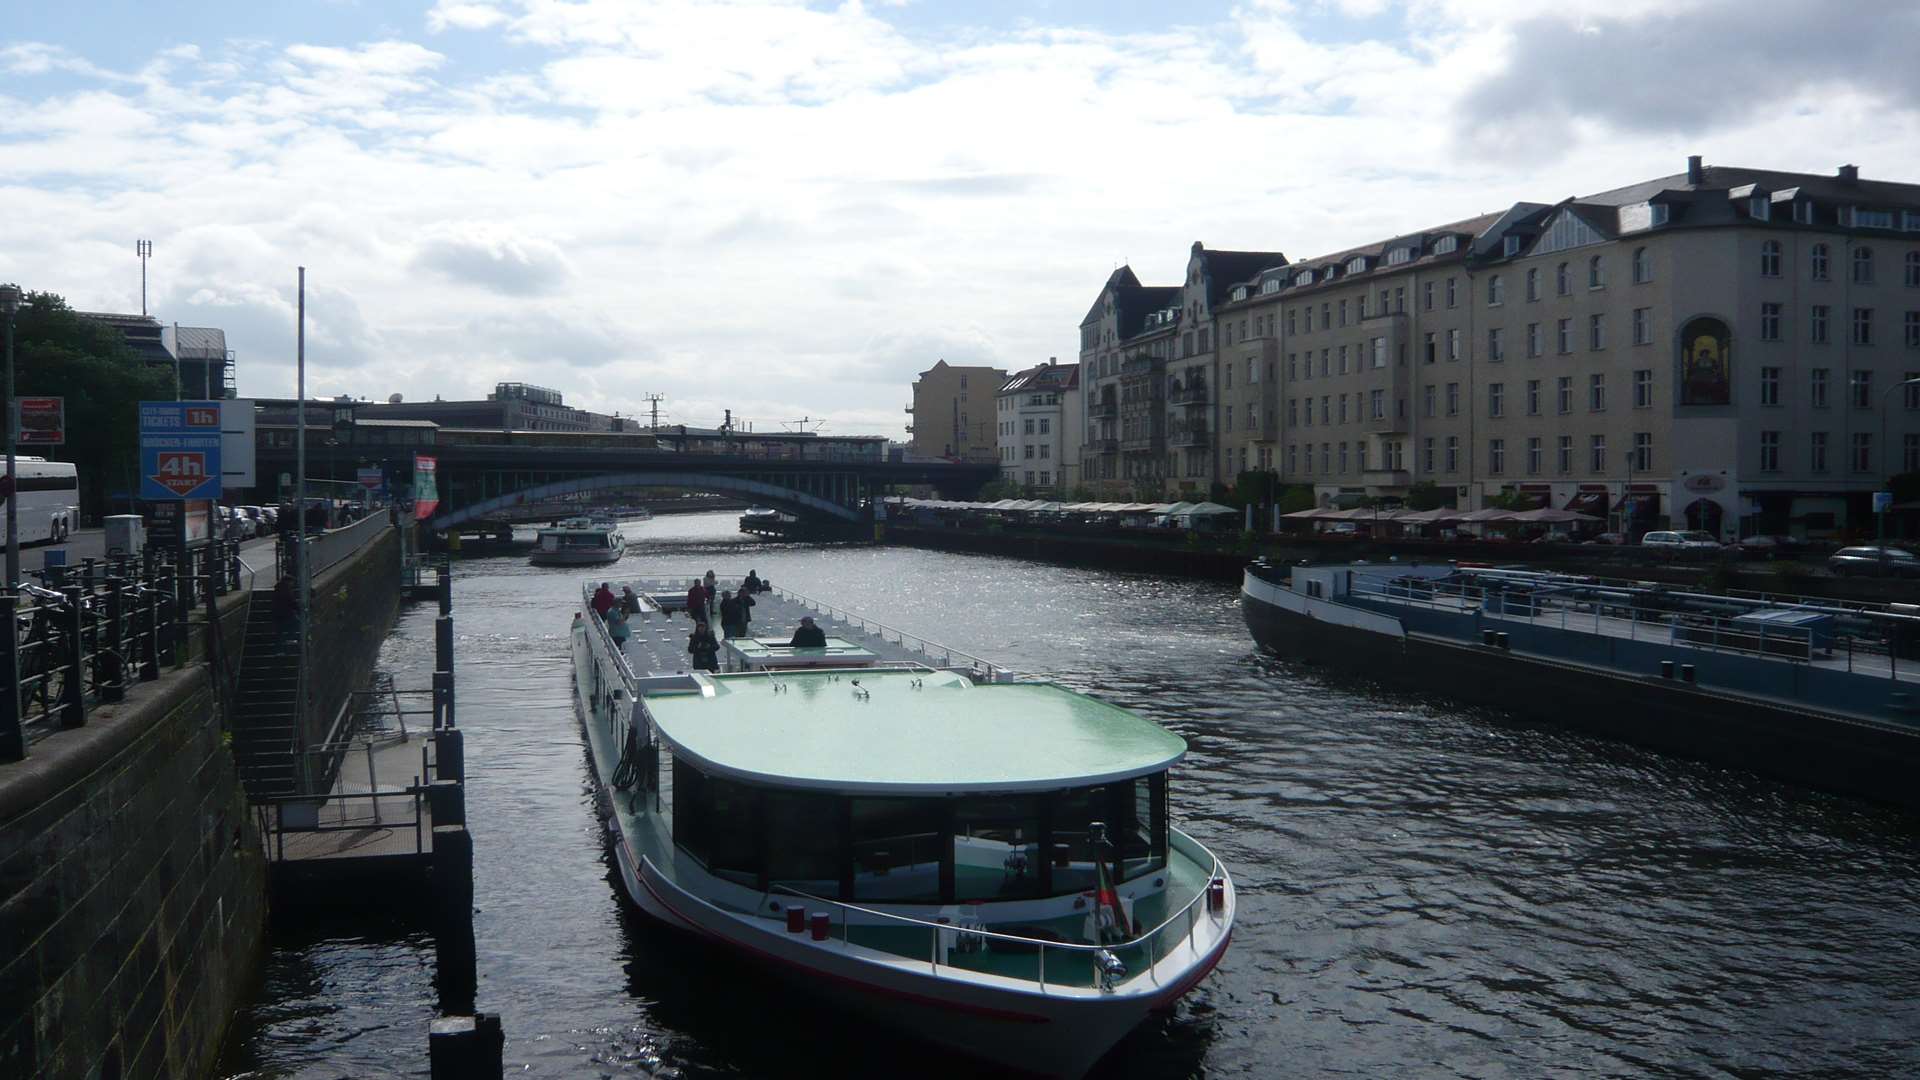 Central Berlin showing the Spree river. The GDR musuem is nearby